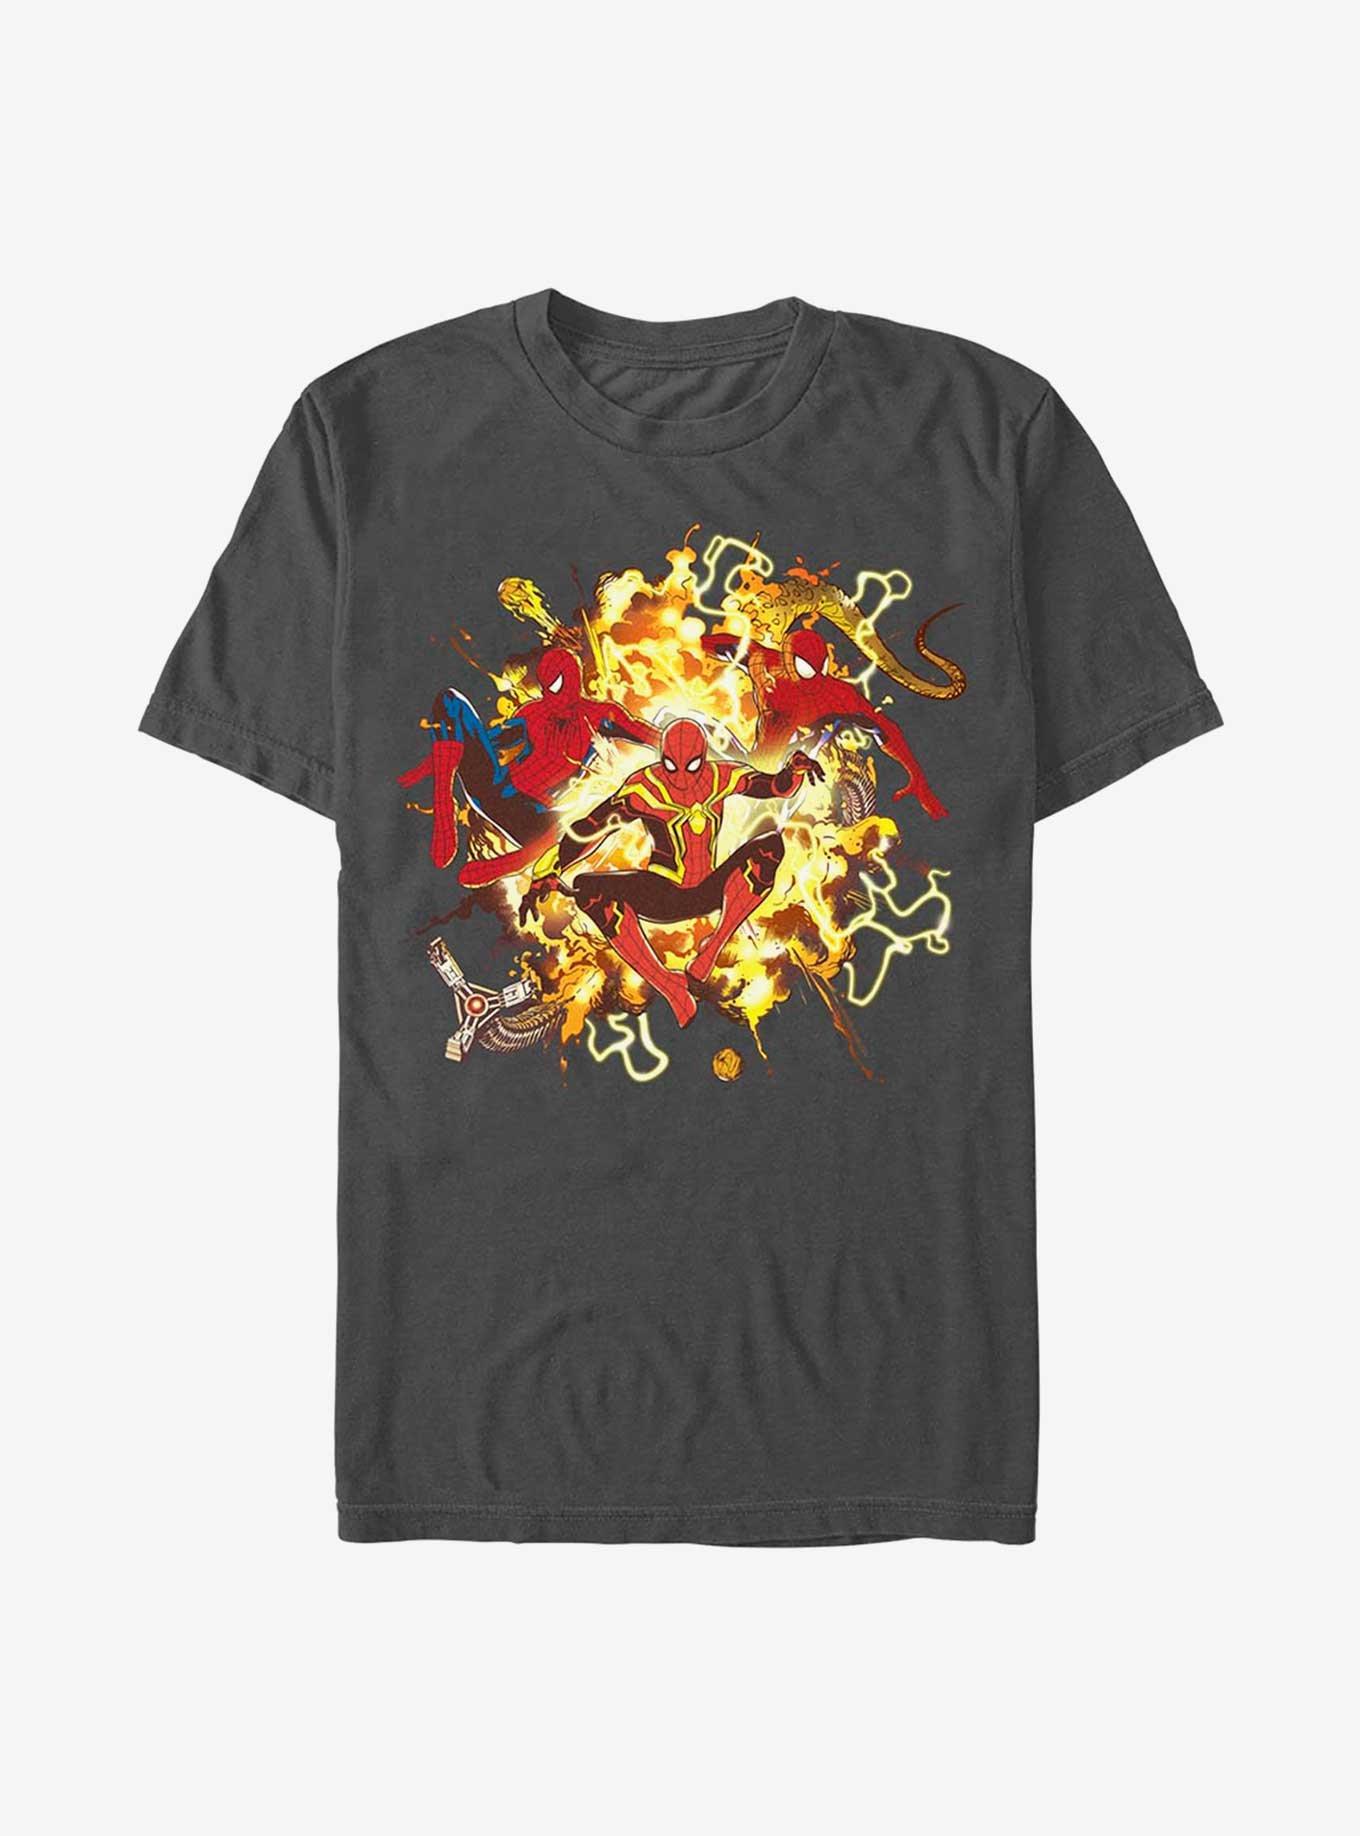 Hot Topic Marvel Spider-Man Spidey Explosion T-Shirt